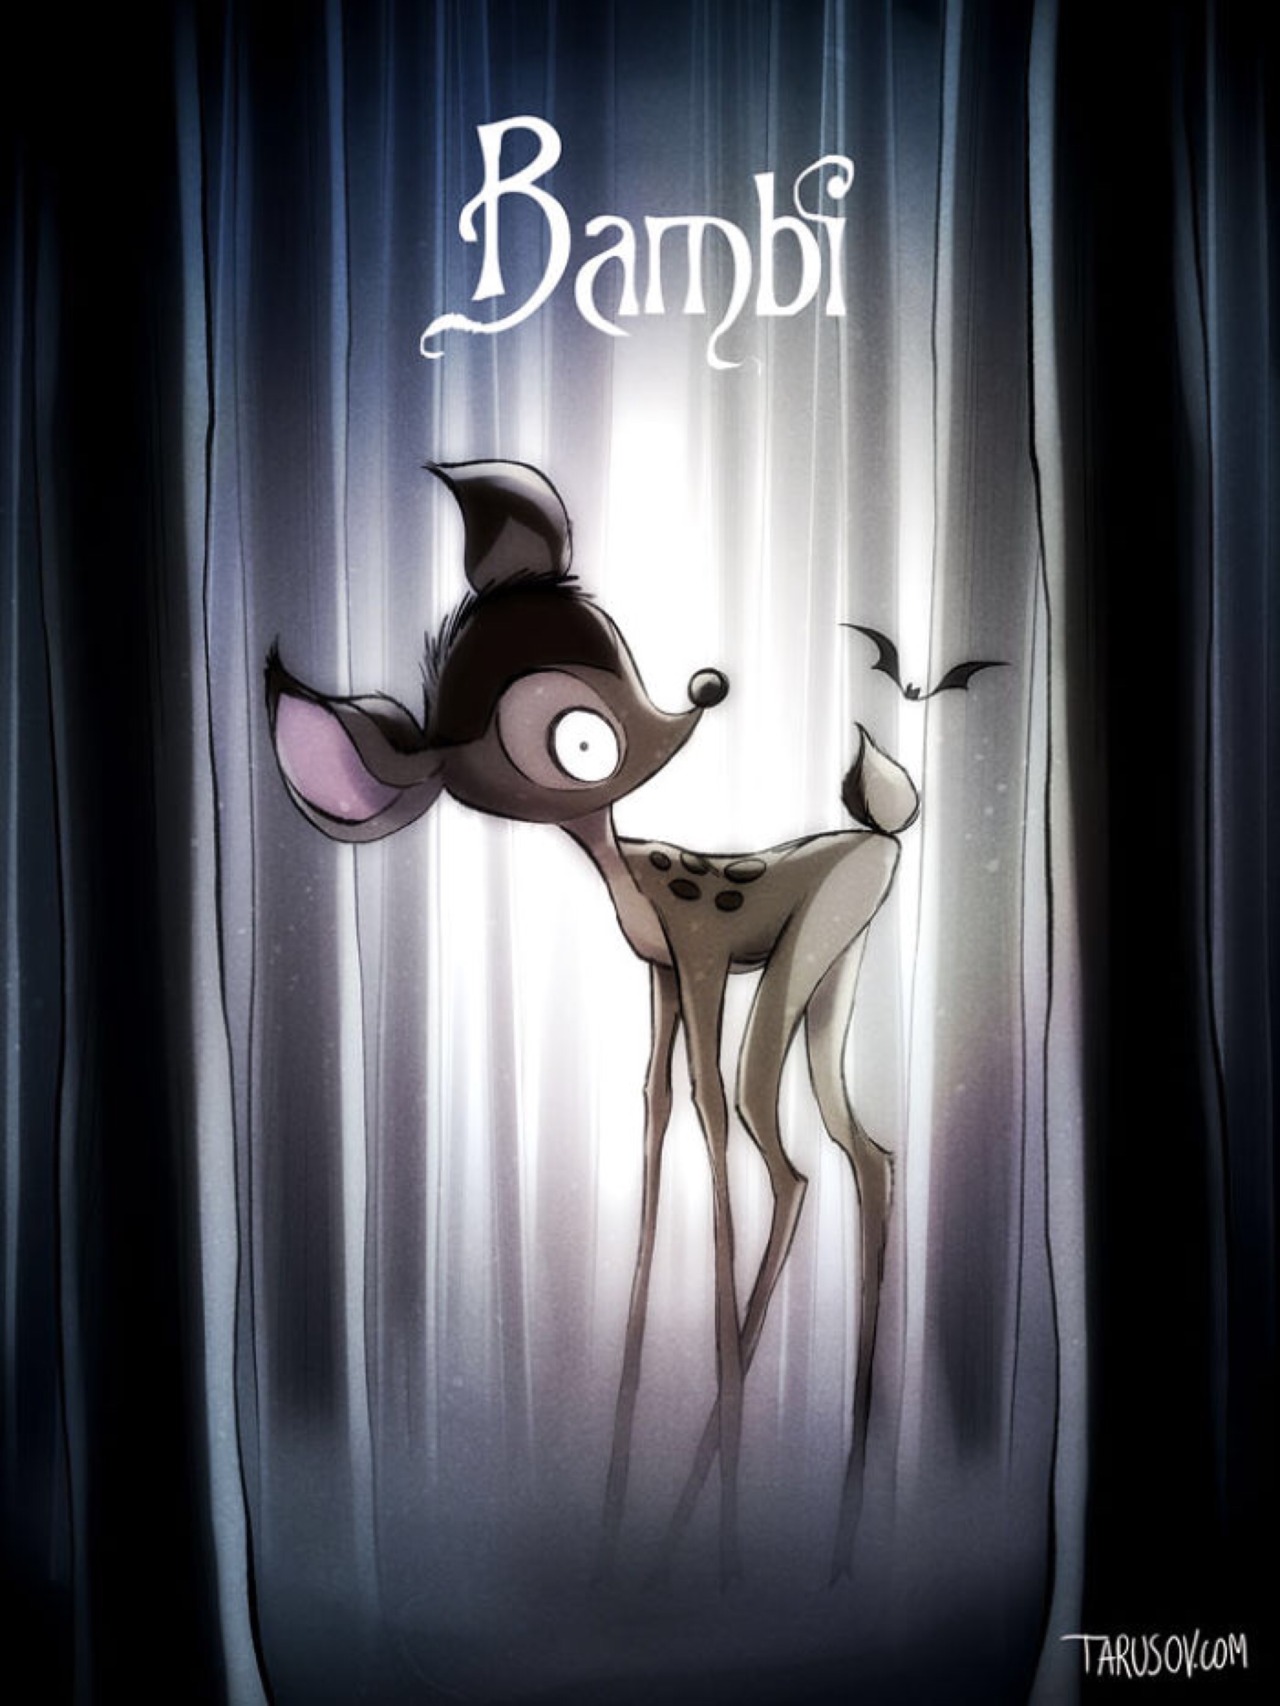 lizdarcy83:  Disney movies re-imagined as directed by Tim Burton  http://the-daily.buzz/tim-burton-disney-movies/?utm_content=inf_4_1163_2&amp;tse_id=INF_81f616a7086c4551bfc632c55450d0ca